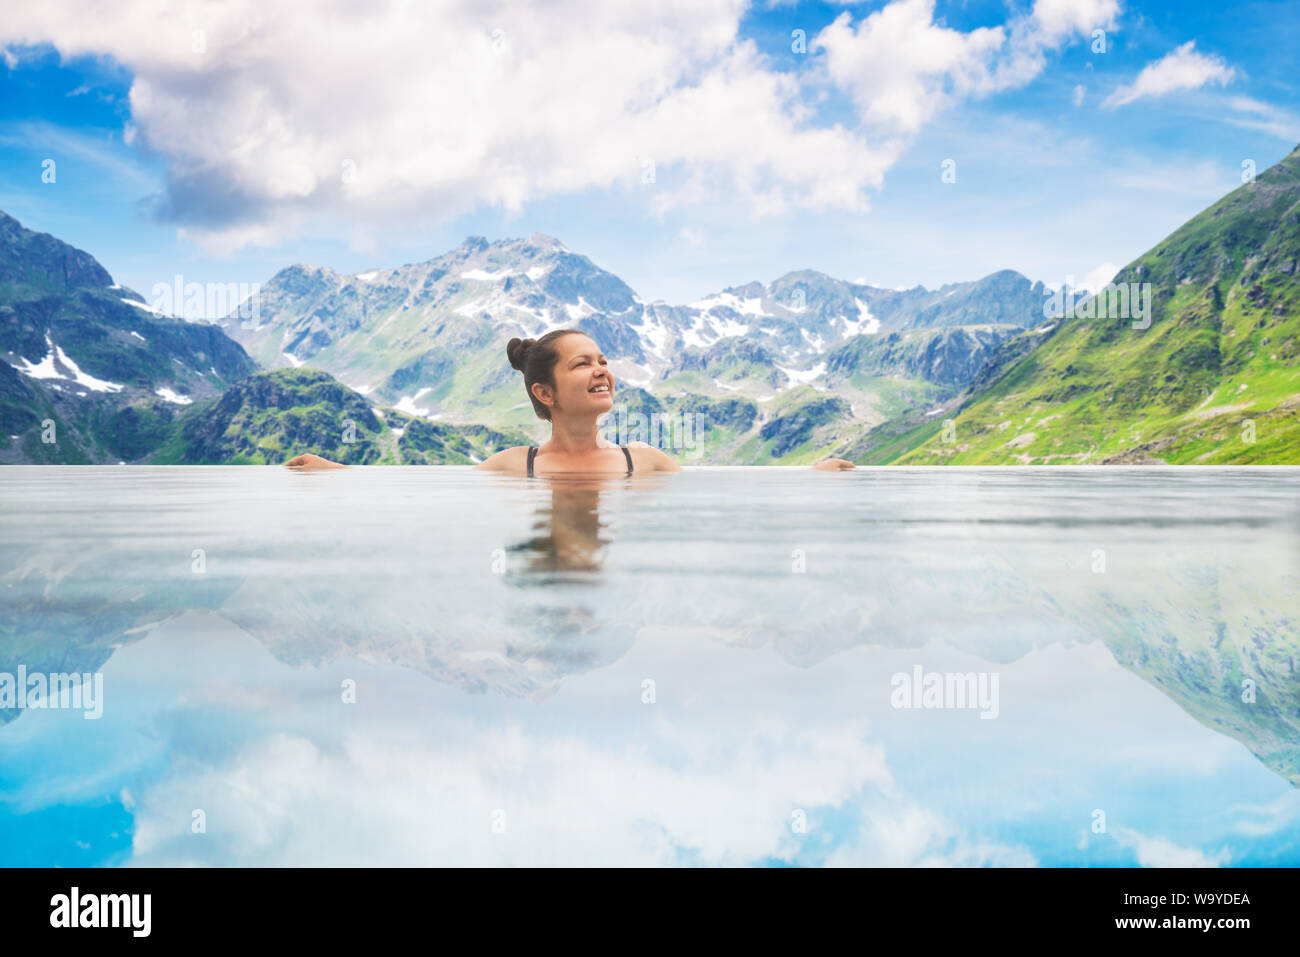 Photo Of Woman In Infinity Pool In Mountains Stock Photo